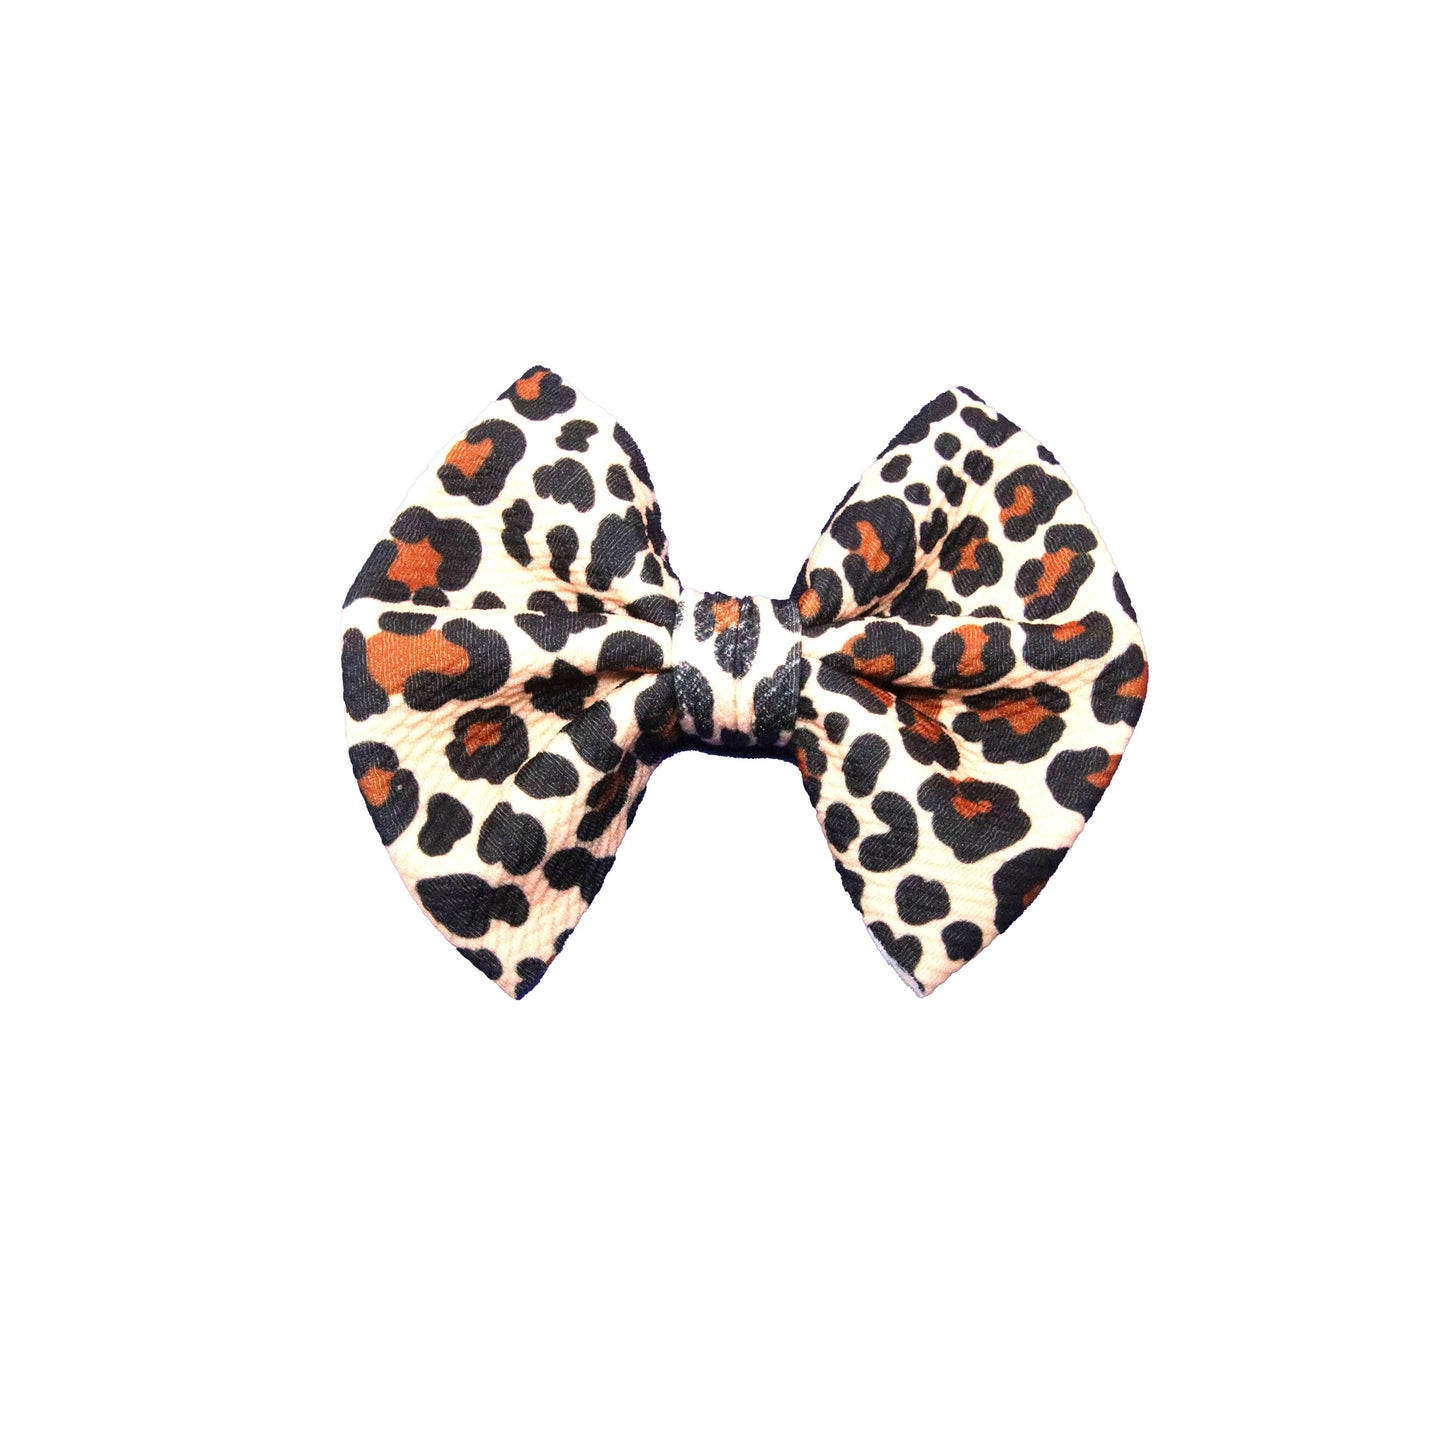 5", Bow, Hair Bow, Leopard Print, Fabric Bow, New Product - 04OCT2020